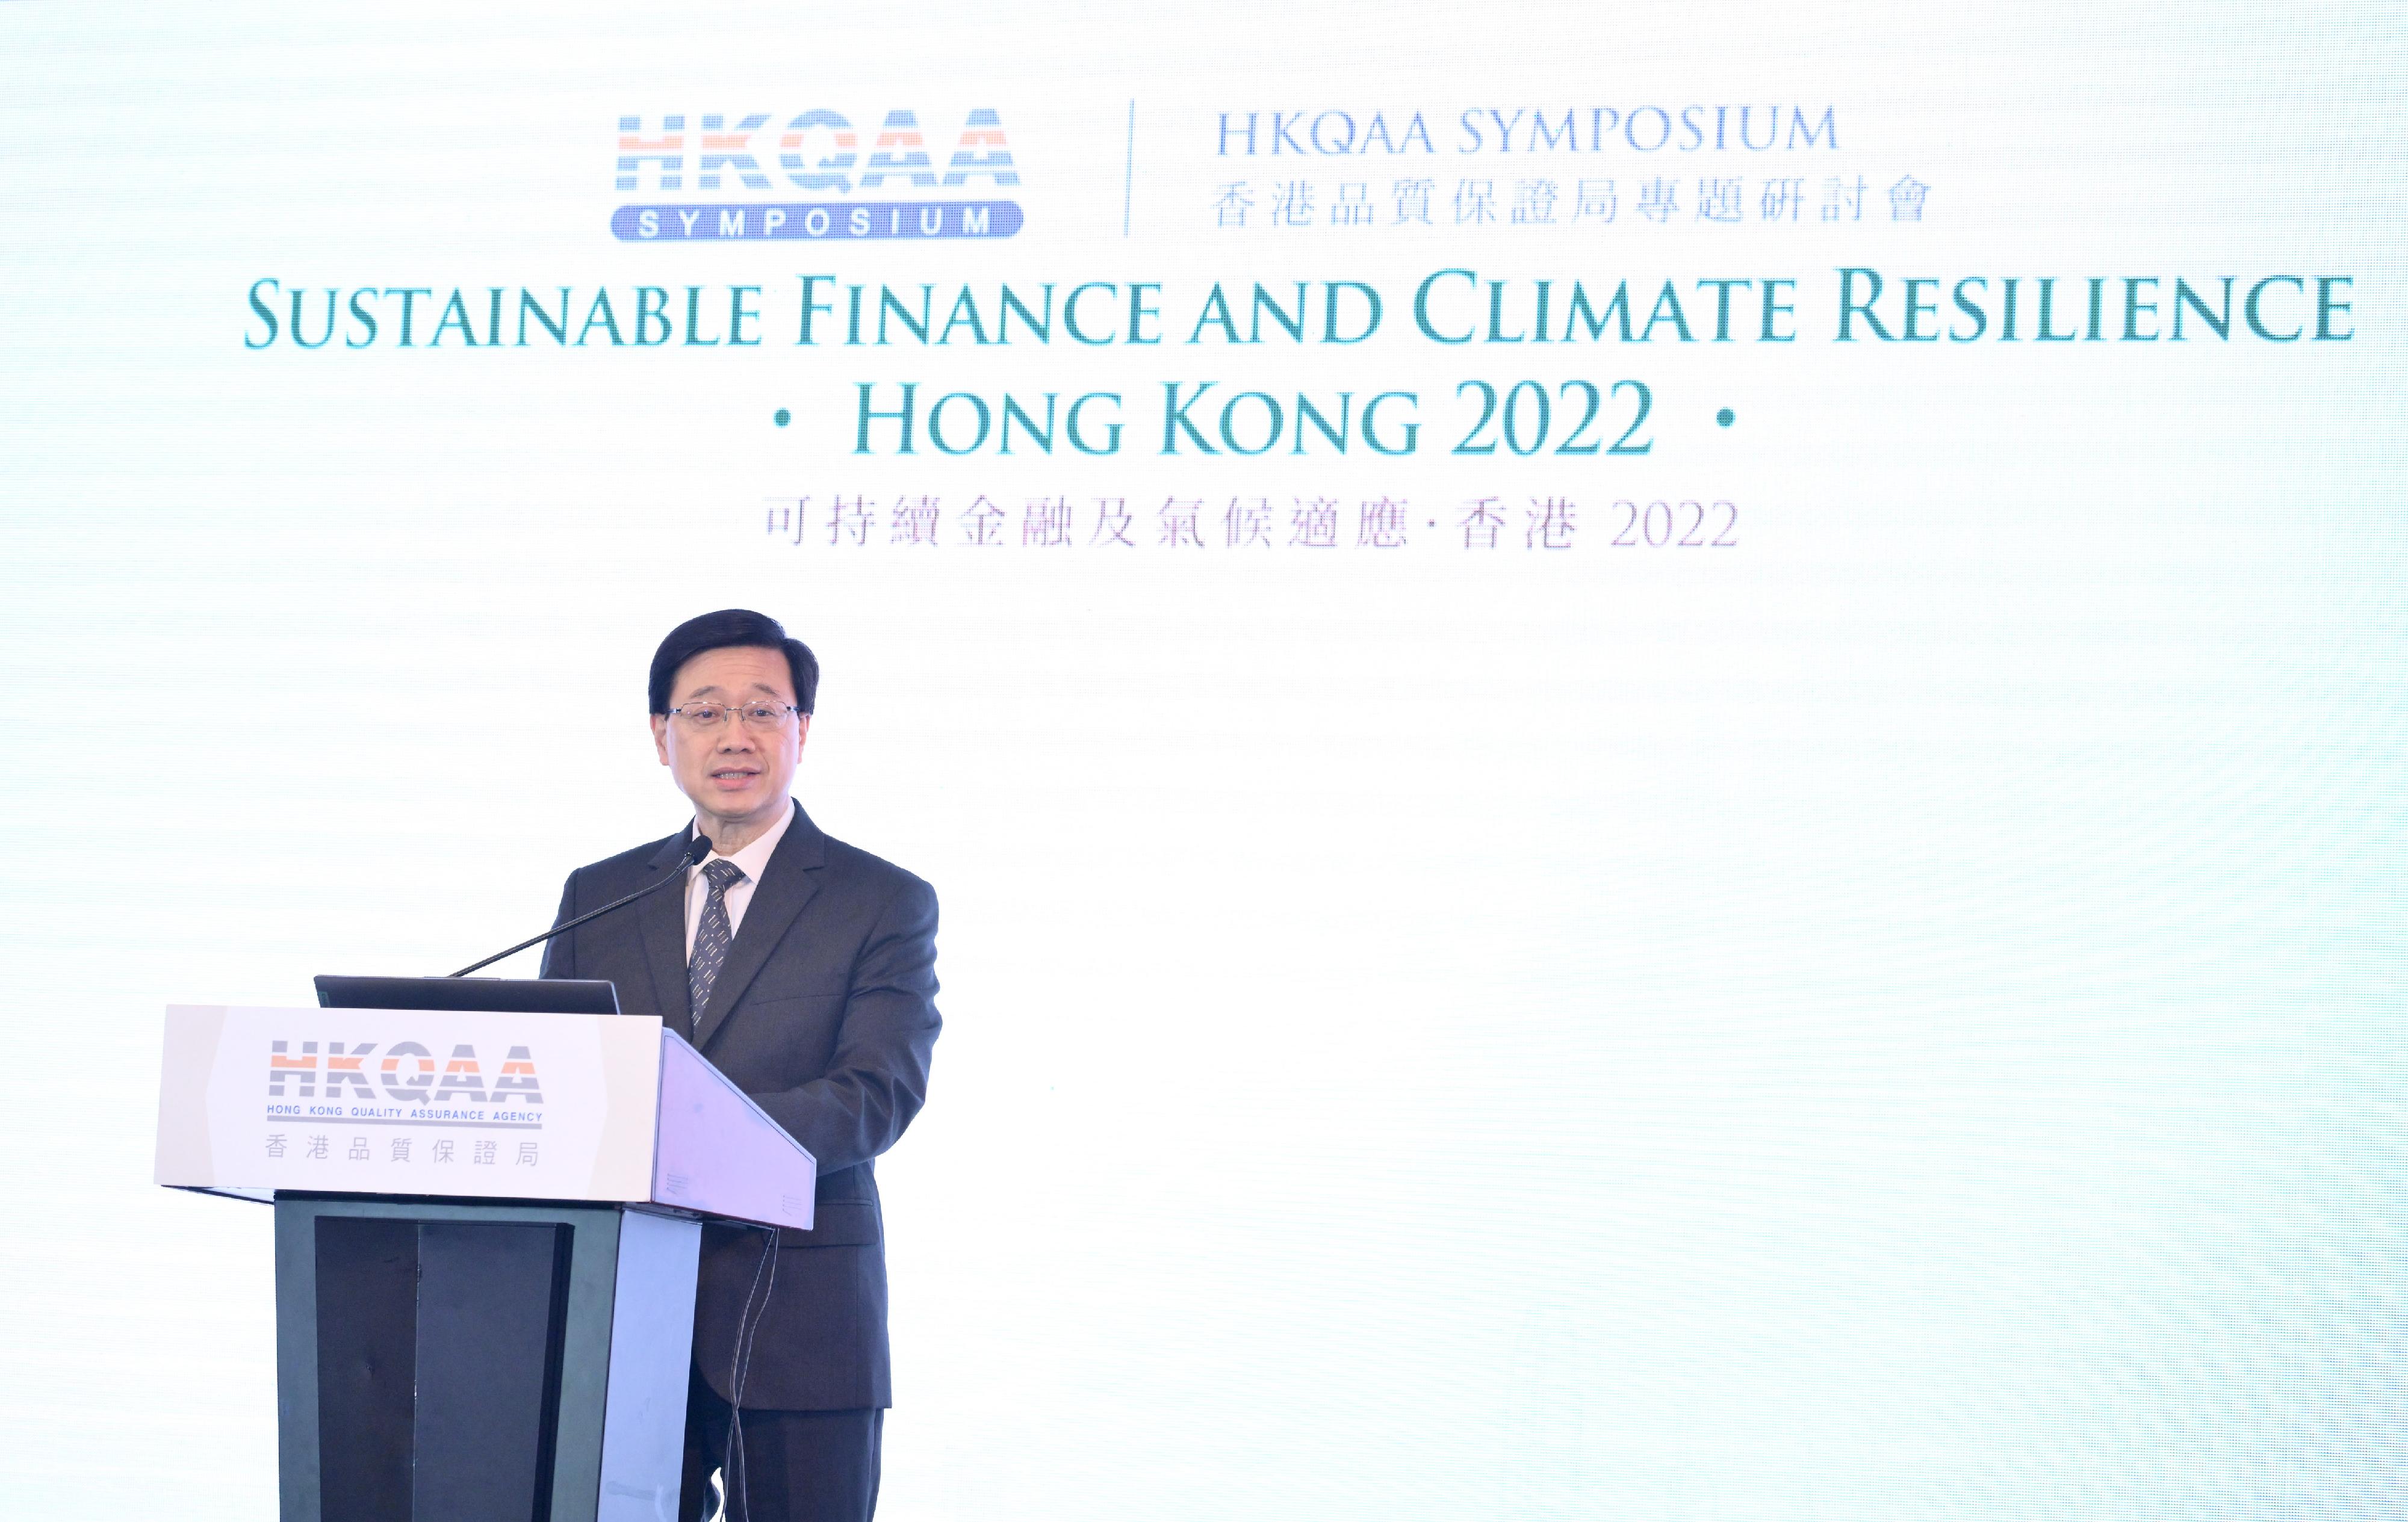 The Chief Executive, Mr John Lee, speaks at the HKQAA International Symposium - Sustainable Finance and Climate Resilience • Hong Kong 2022 today (December 1).